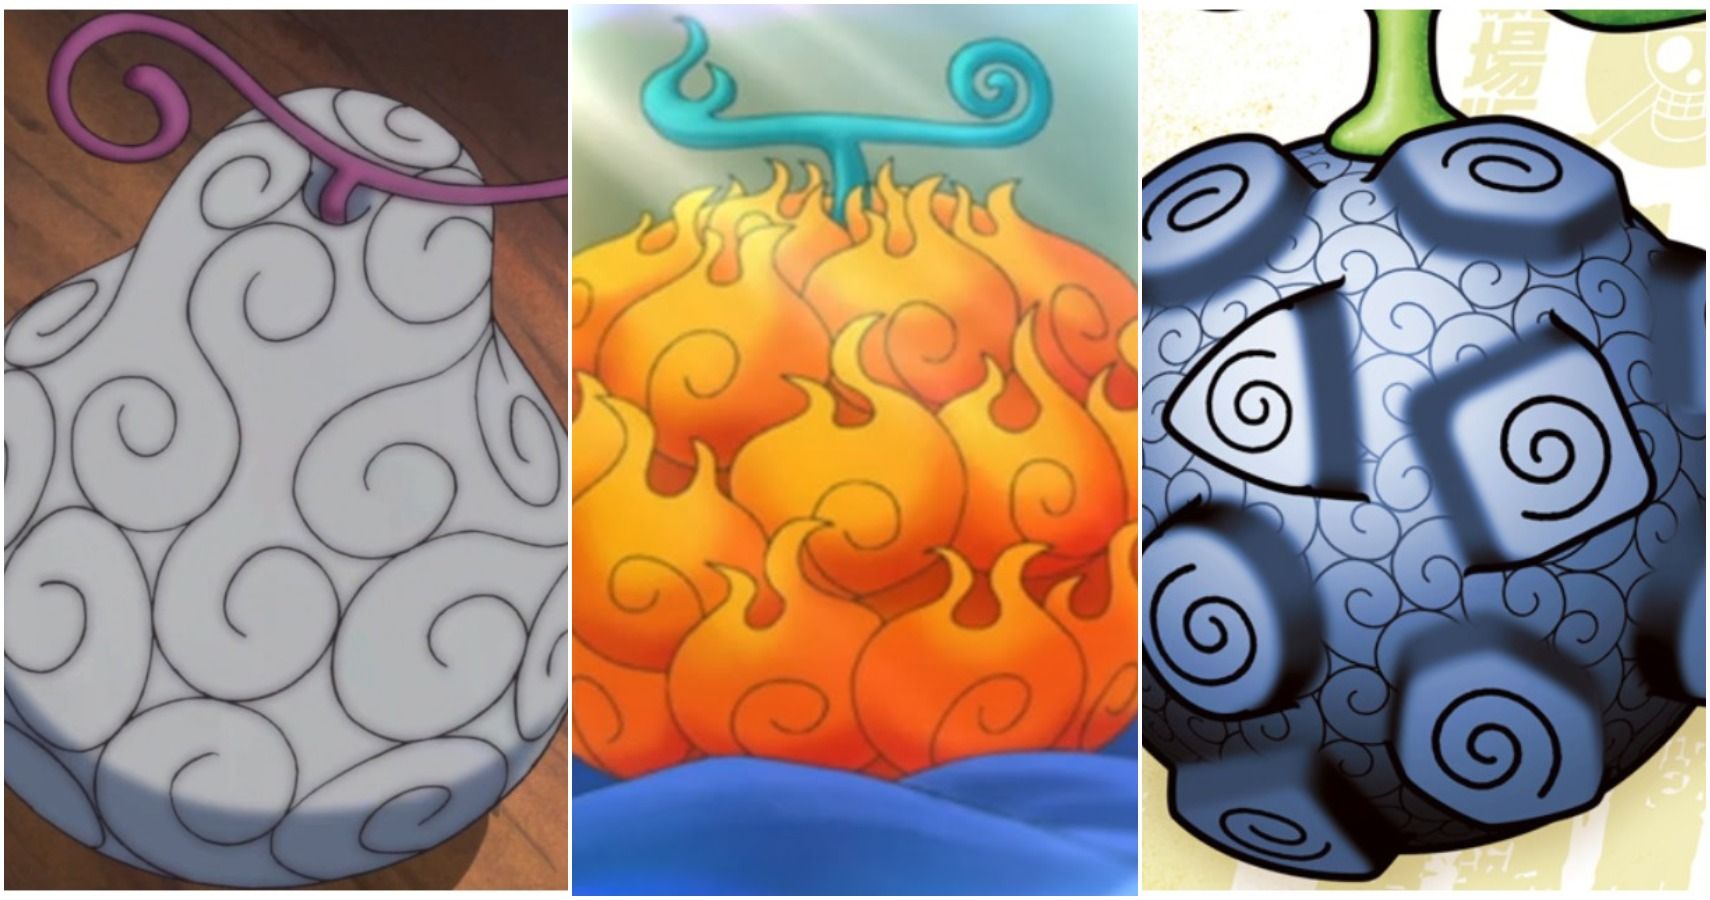 Which devilfruit is your favorite by looks? : r/OnePiece